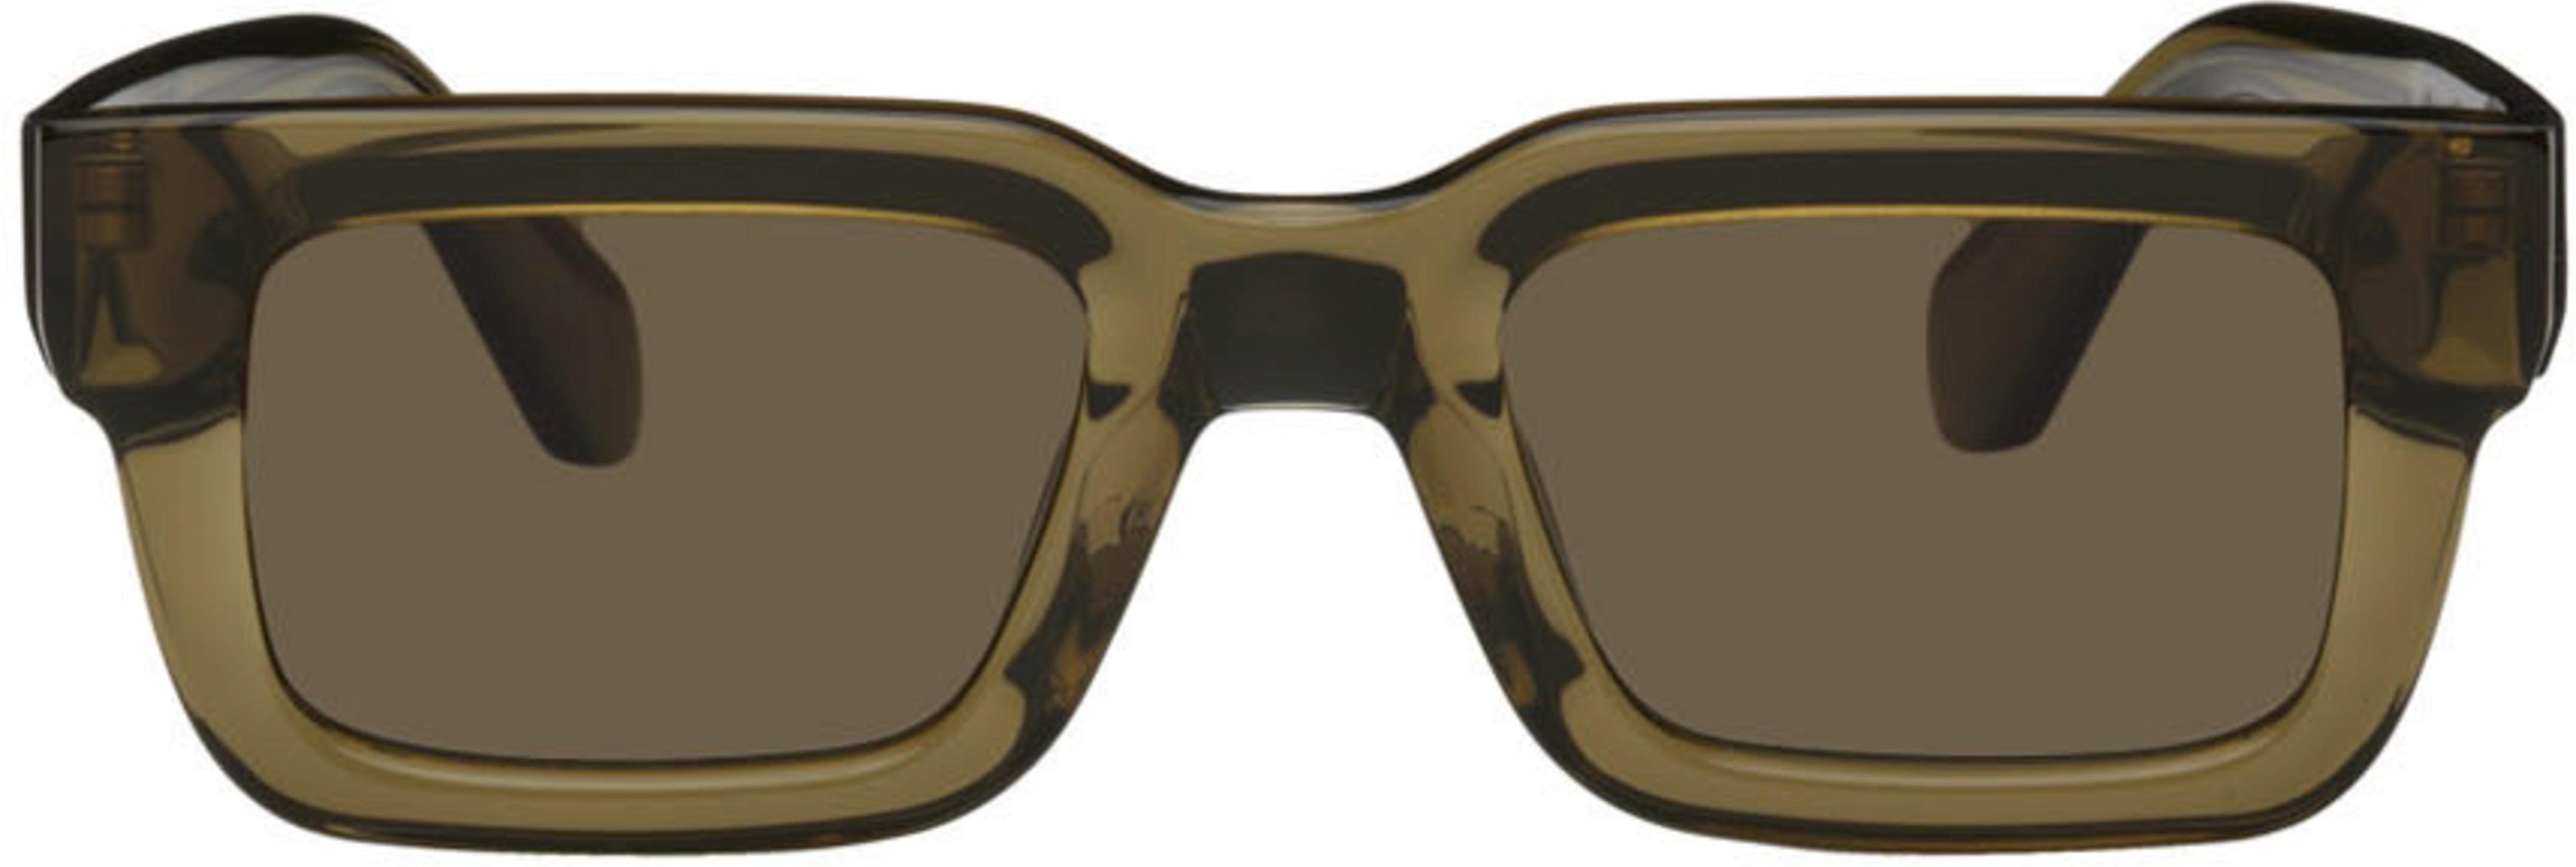 Green 05 Sunglasses by CHIMI